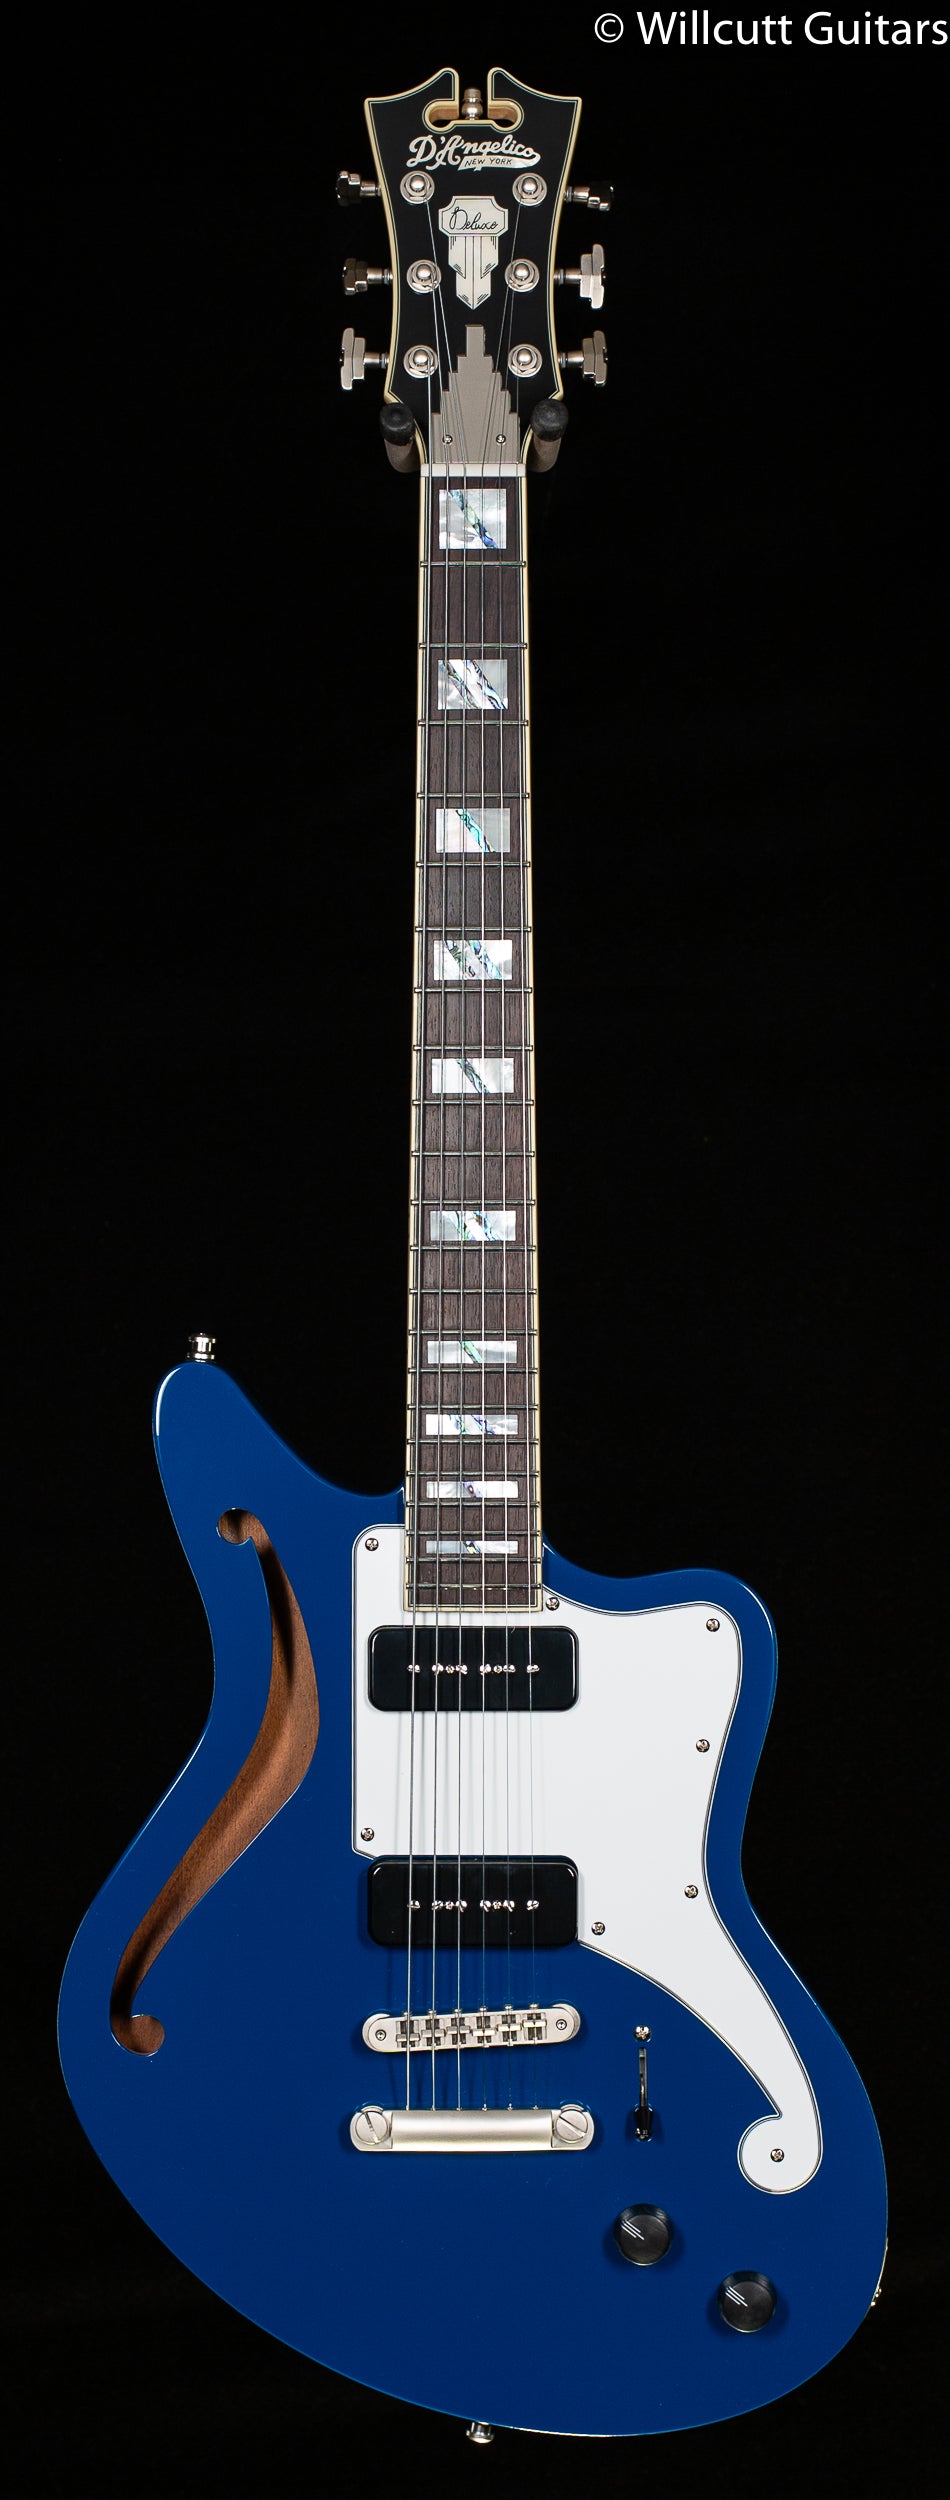 D'Angelico Deluxe Bedford SH LE Sapphire - Willcutt Guitars